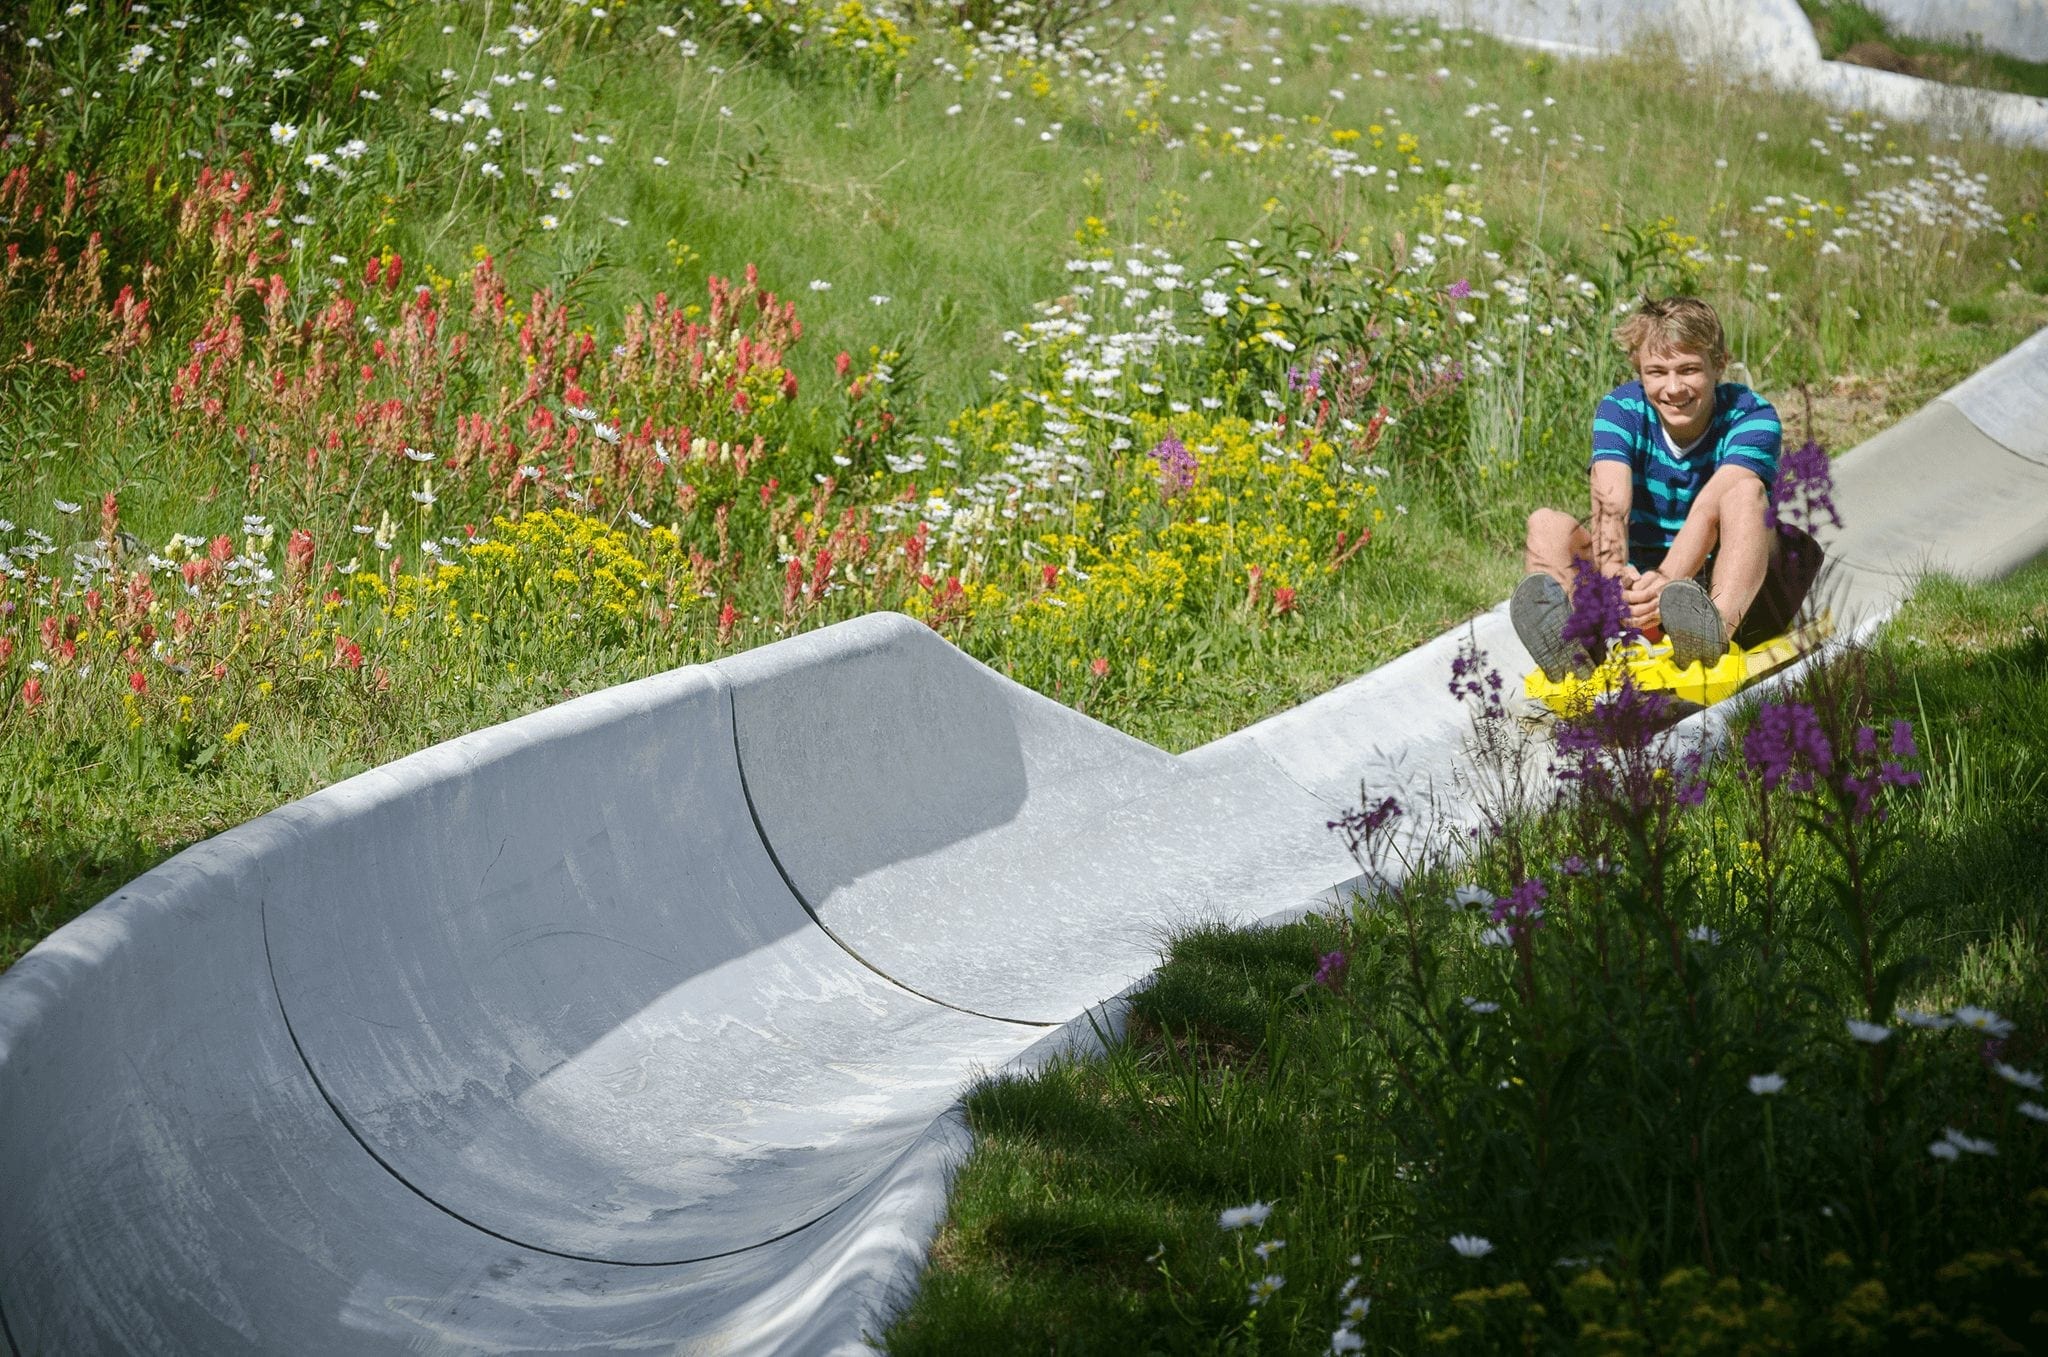 A kid riding down the alpine slide for Epic Discovery in Breckenridge